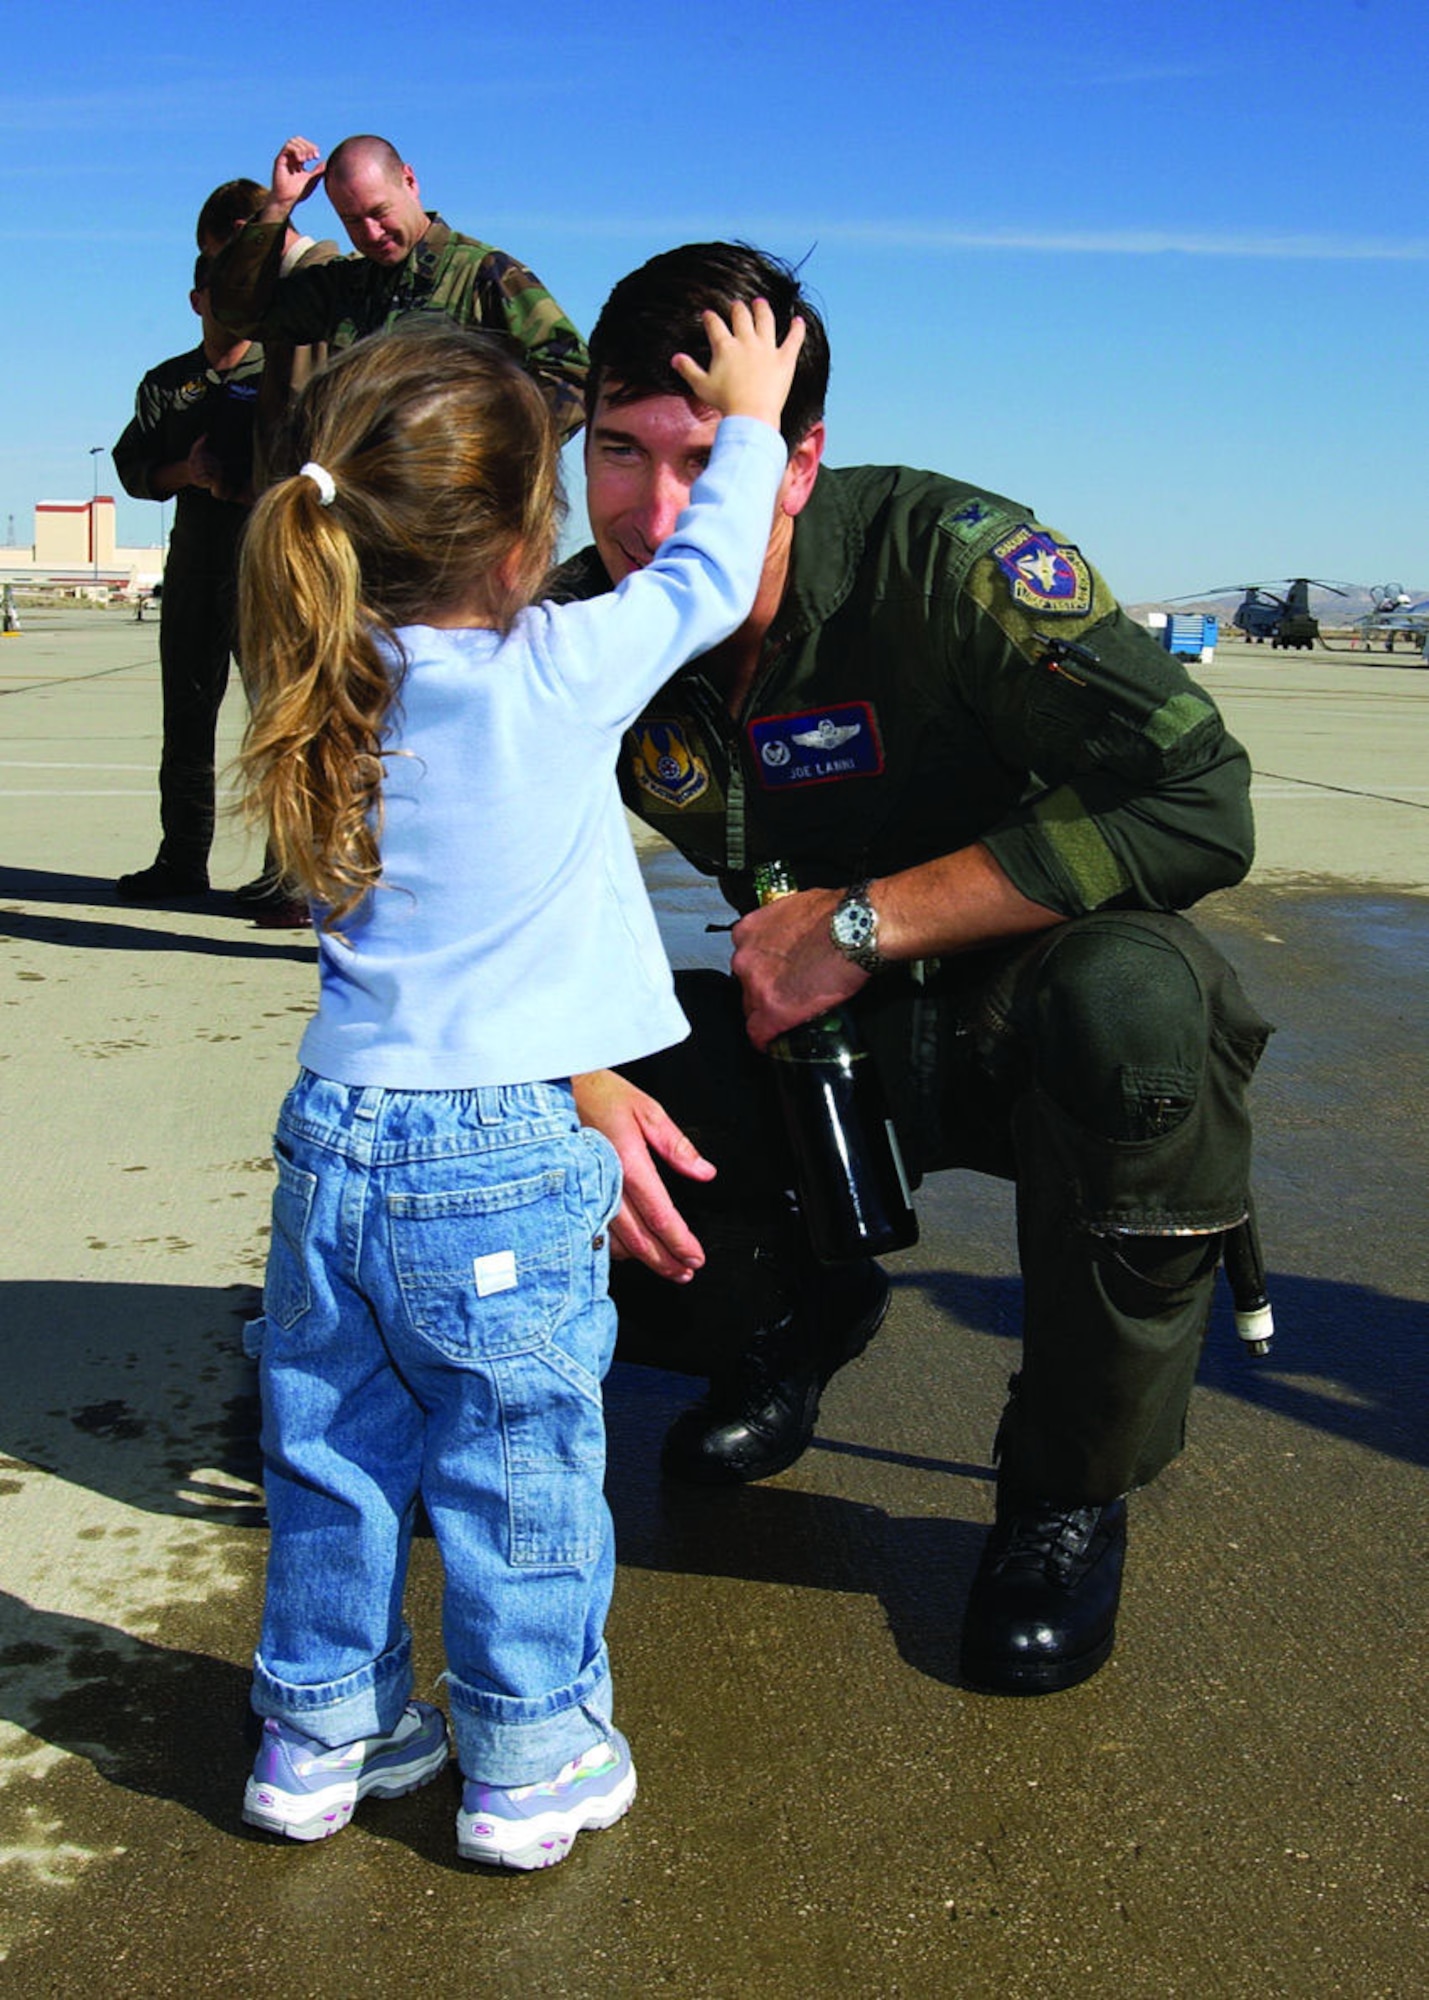 Col. Joe Lanni, then 412th Test Wing commander, smiles as his daughter, Michaela, 2, fixes his hair after being hosed down following his fini flight Jan. 31, 2006. Colonel Lanni passed command of the 412th TW to Col. Arnold Bunch on Feb. 2 in hangar 1600.  (Photo by Chad Bellay)